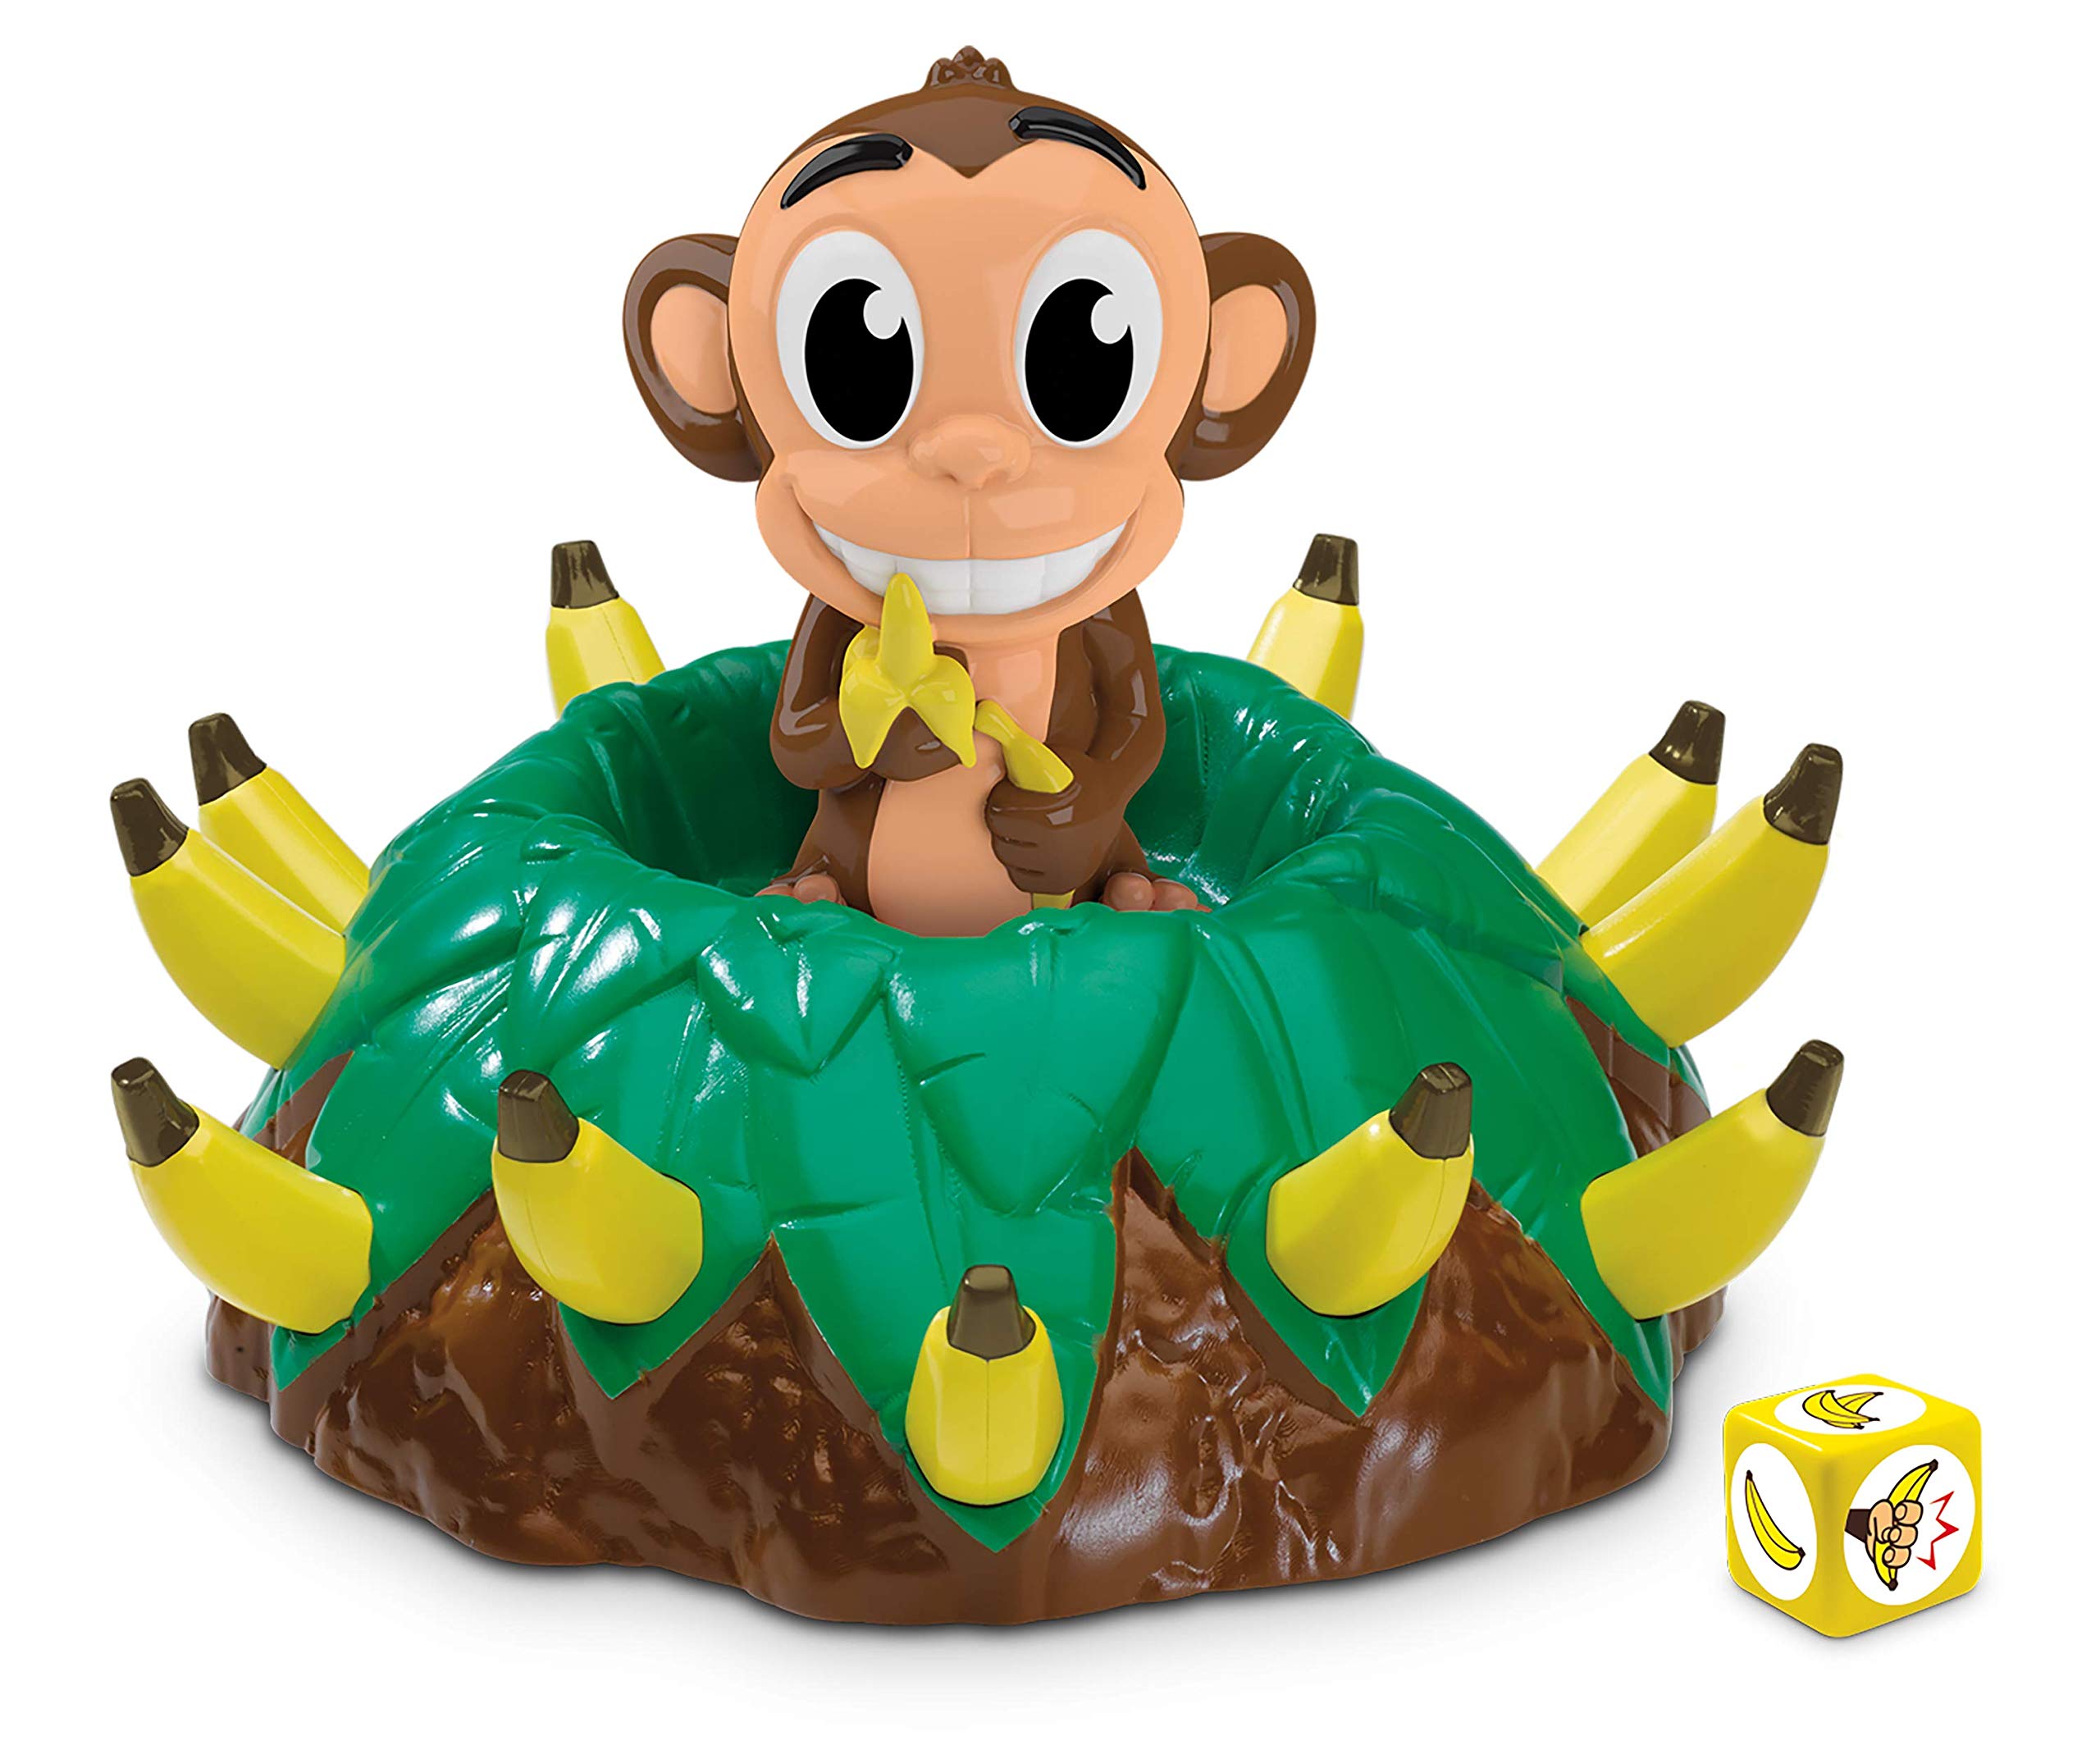 Banana Blast - Pull The Bananas Until The Monkey Jumps Game - Includes a Fun Colorful 24pc Puzzle by Goliath , Green